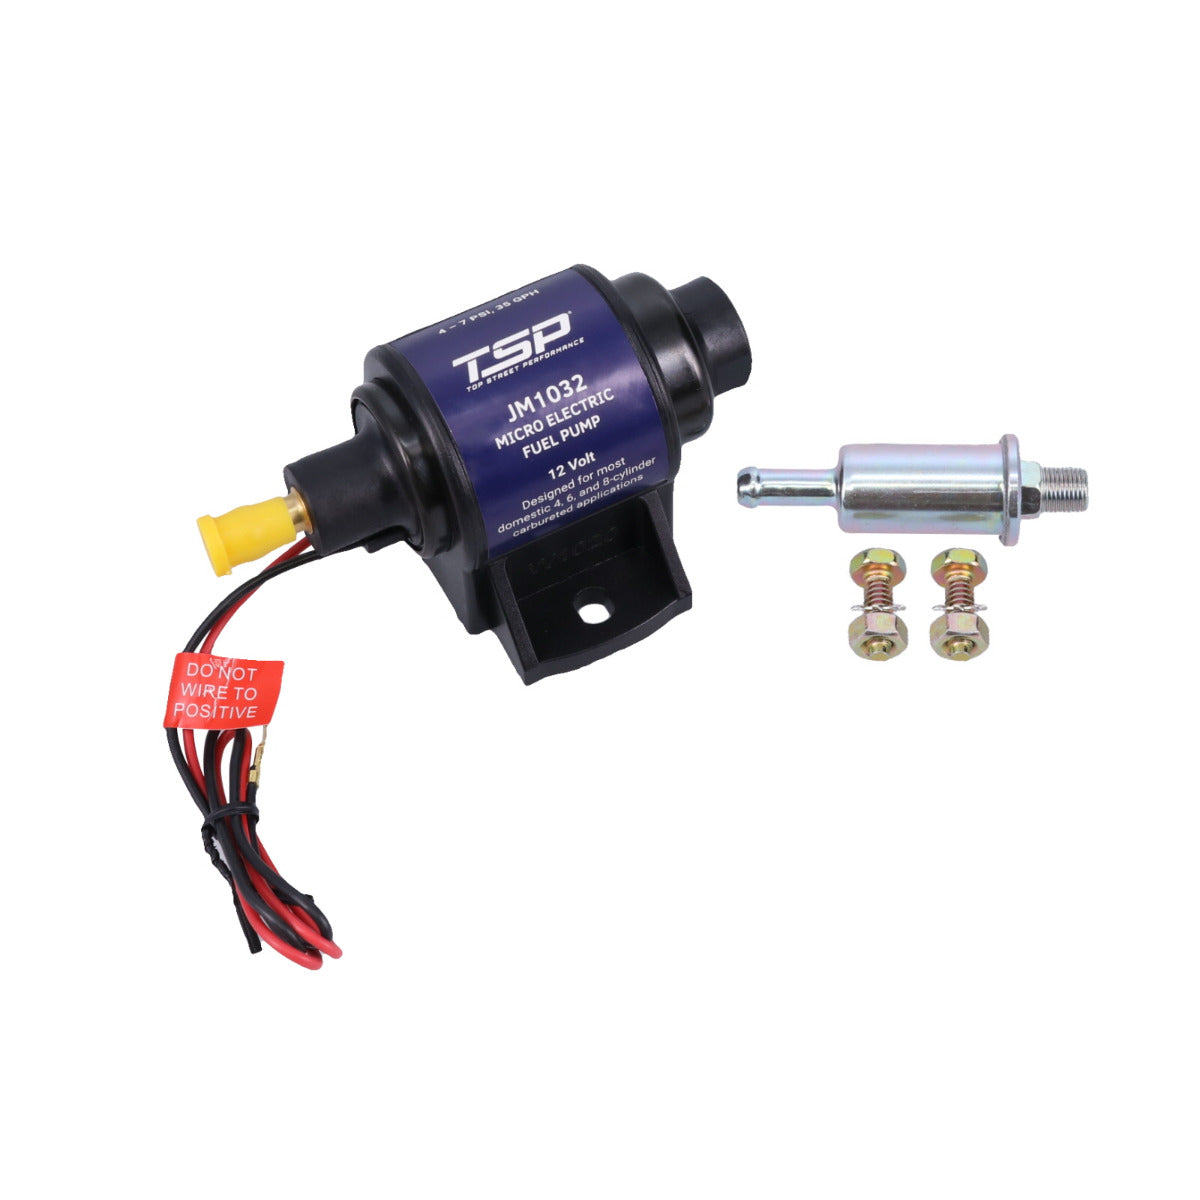 Top Street Performance JM1032 Micro Electric Fuel Pump with Filter, 35 Gph, 4-7 Psi, Gasoline, For Carburetor